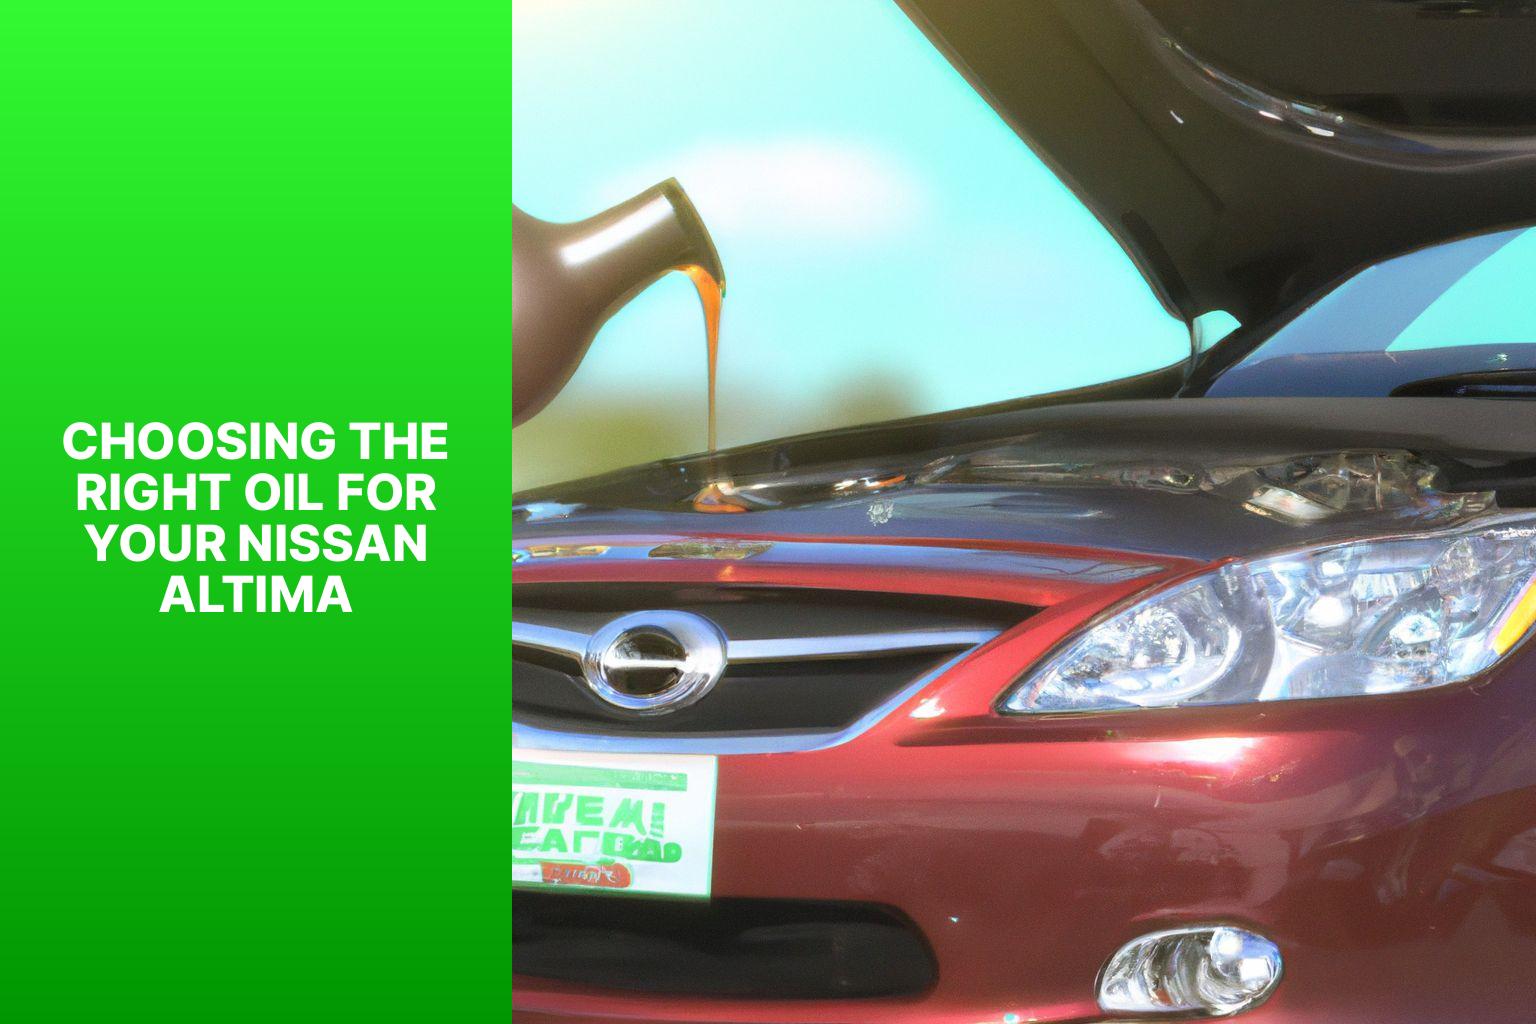 Choosing the Right Oil for Your Nissan Altima - Maximize Efficiency: Choosing the Right Oil for Your Nissan Altima 